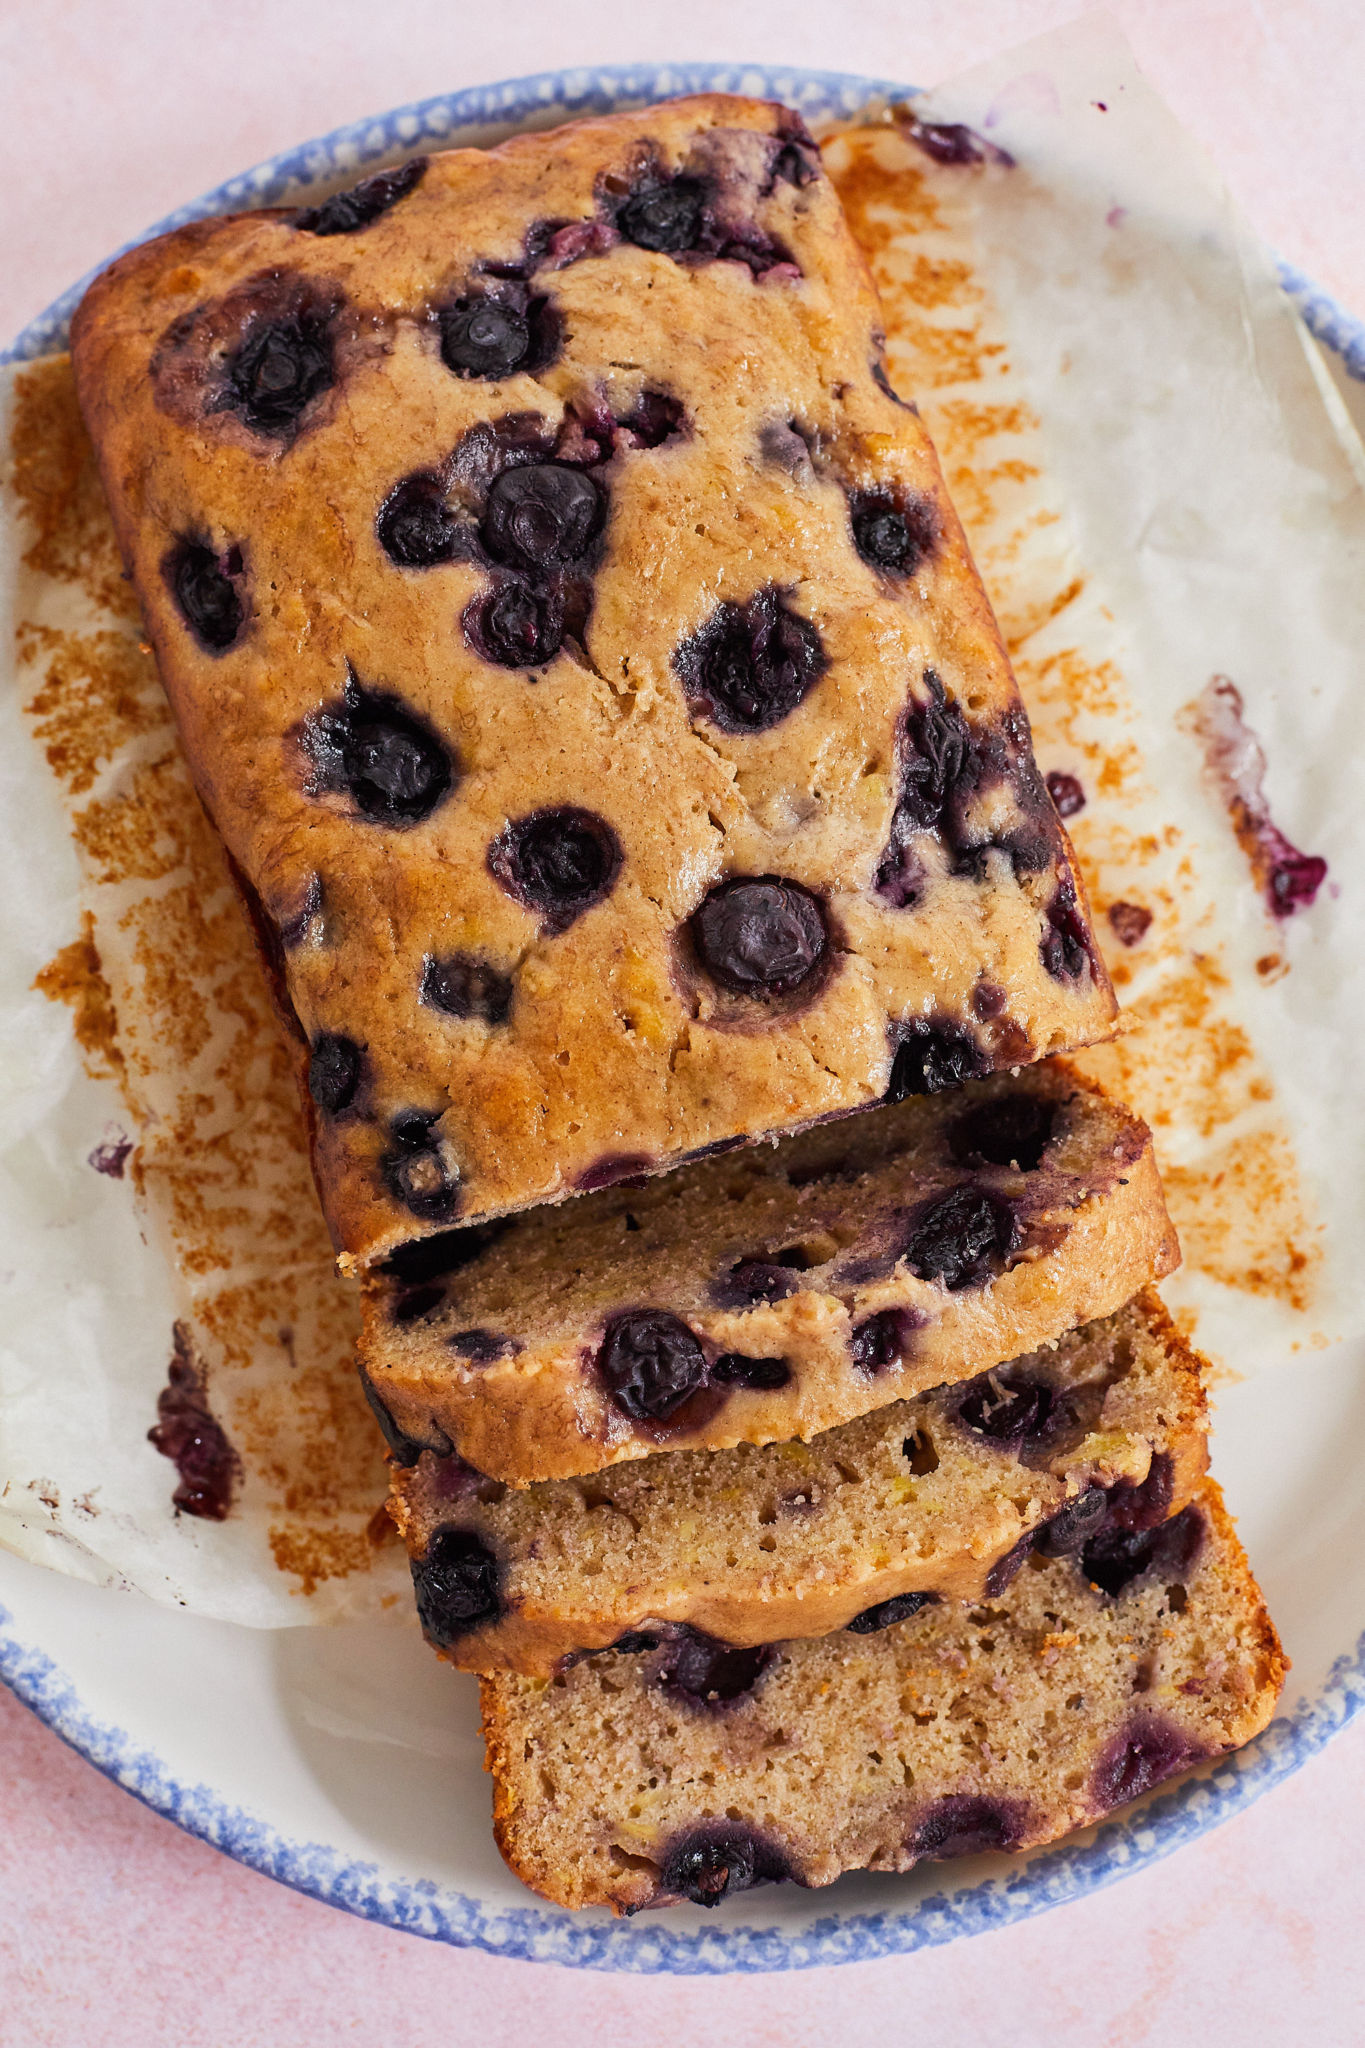 A top-down view of my blueberry banana bread recipe, with part of the loaf sliced.